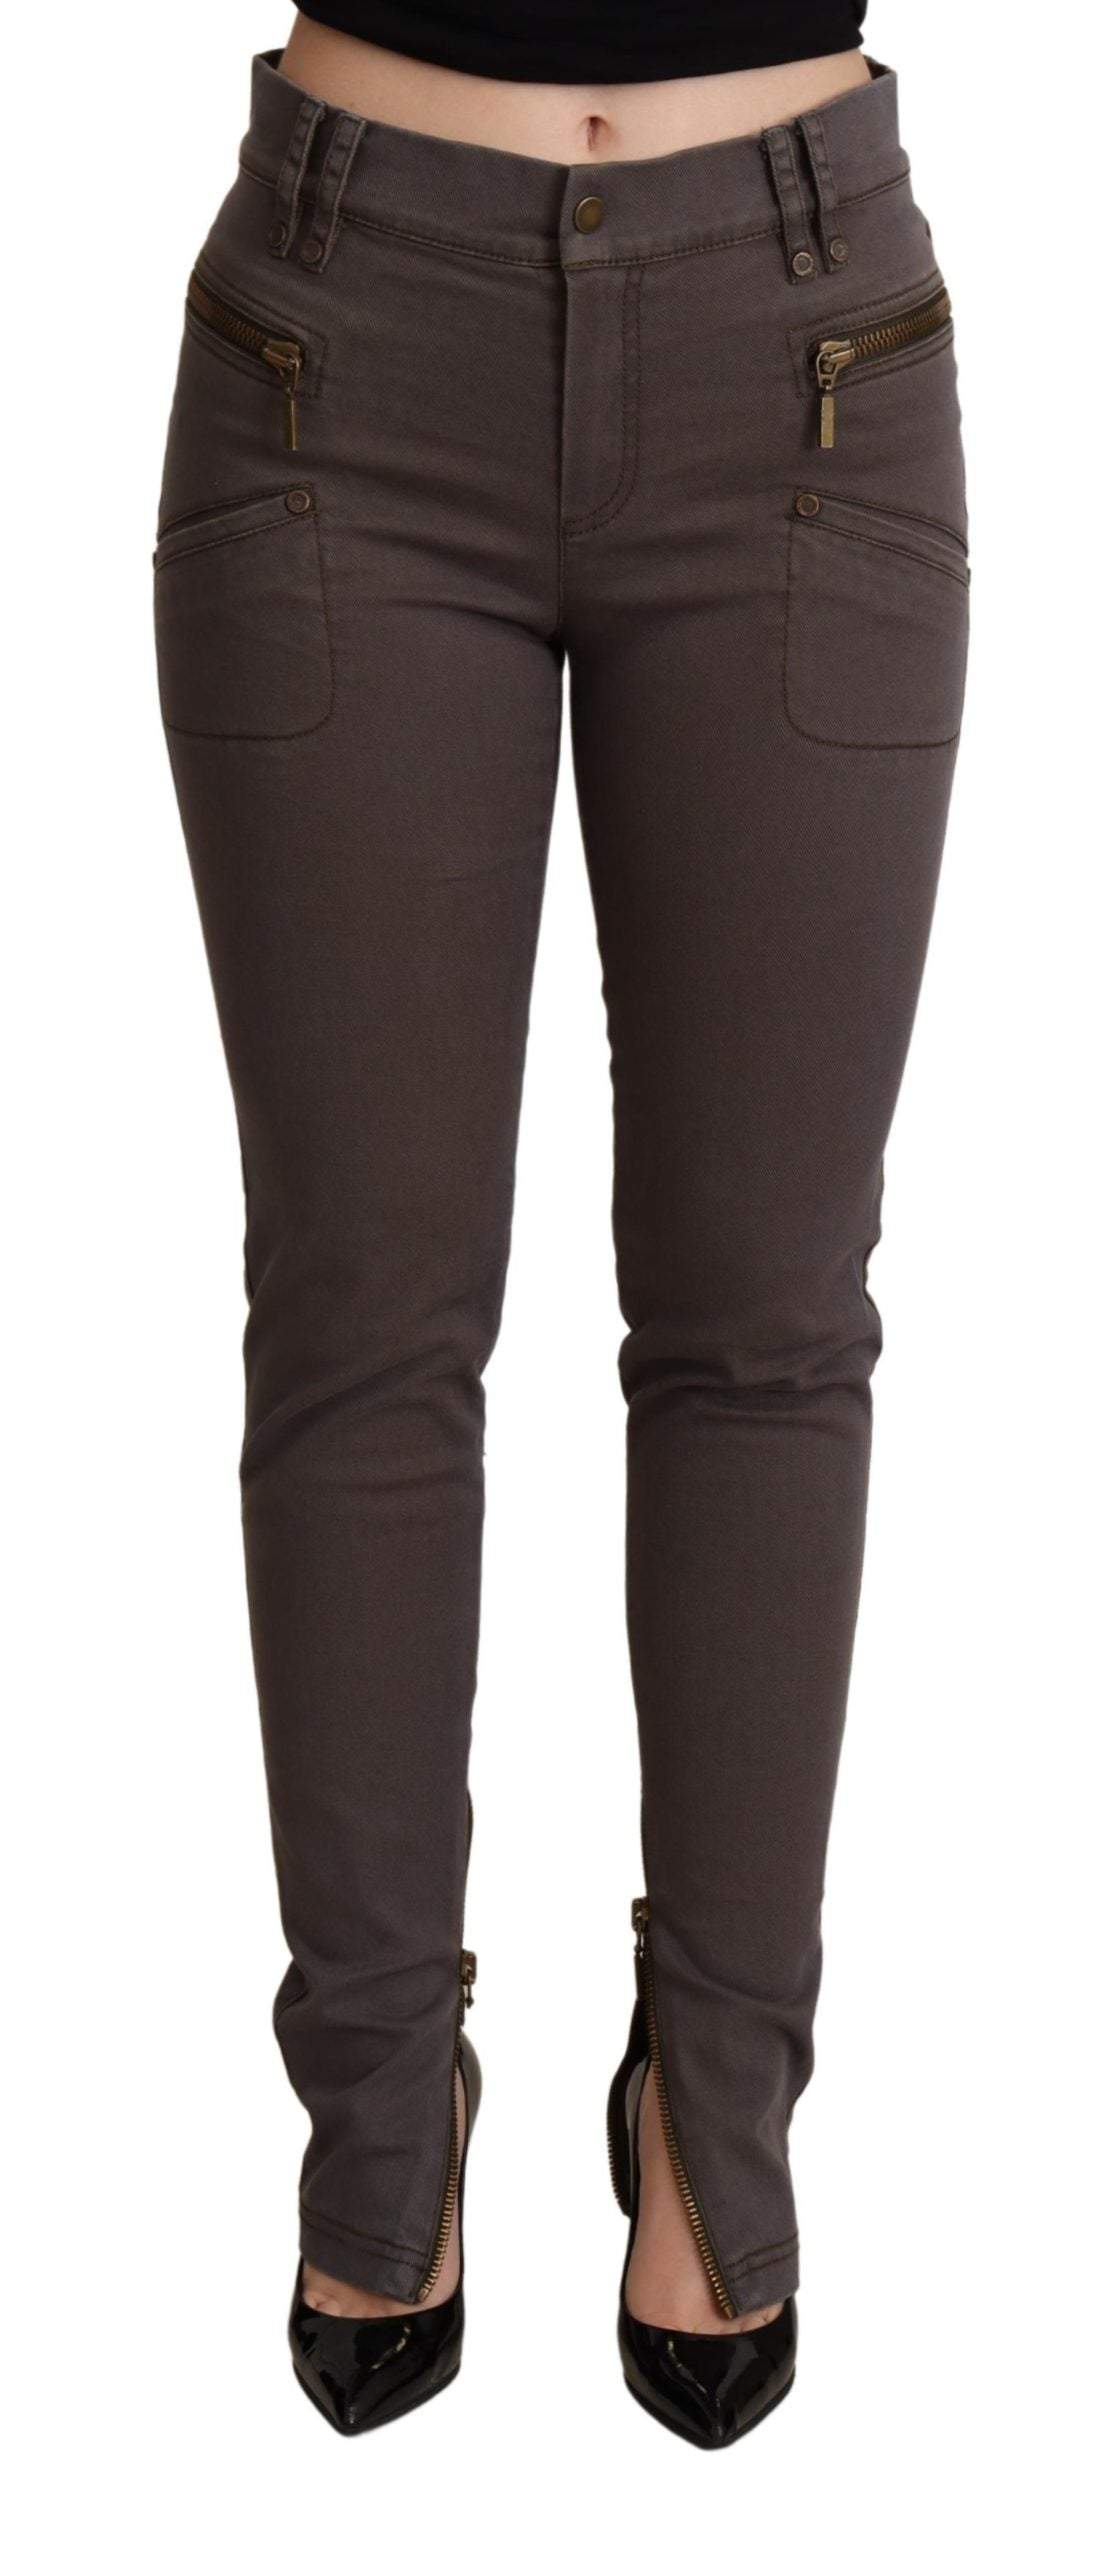 PLEIN SUD  Cotton Stretch Skinny Denim Jeans Brown, feed-agegroup-adult, feed-color-Brown, feed-gender-female, IT38|XS, Jeans & Pants - Women - Clothing, PLEIN SUD at SEYMAYKA